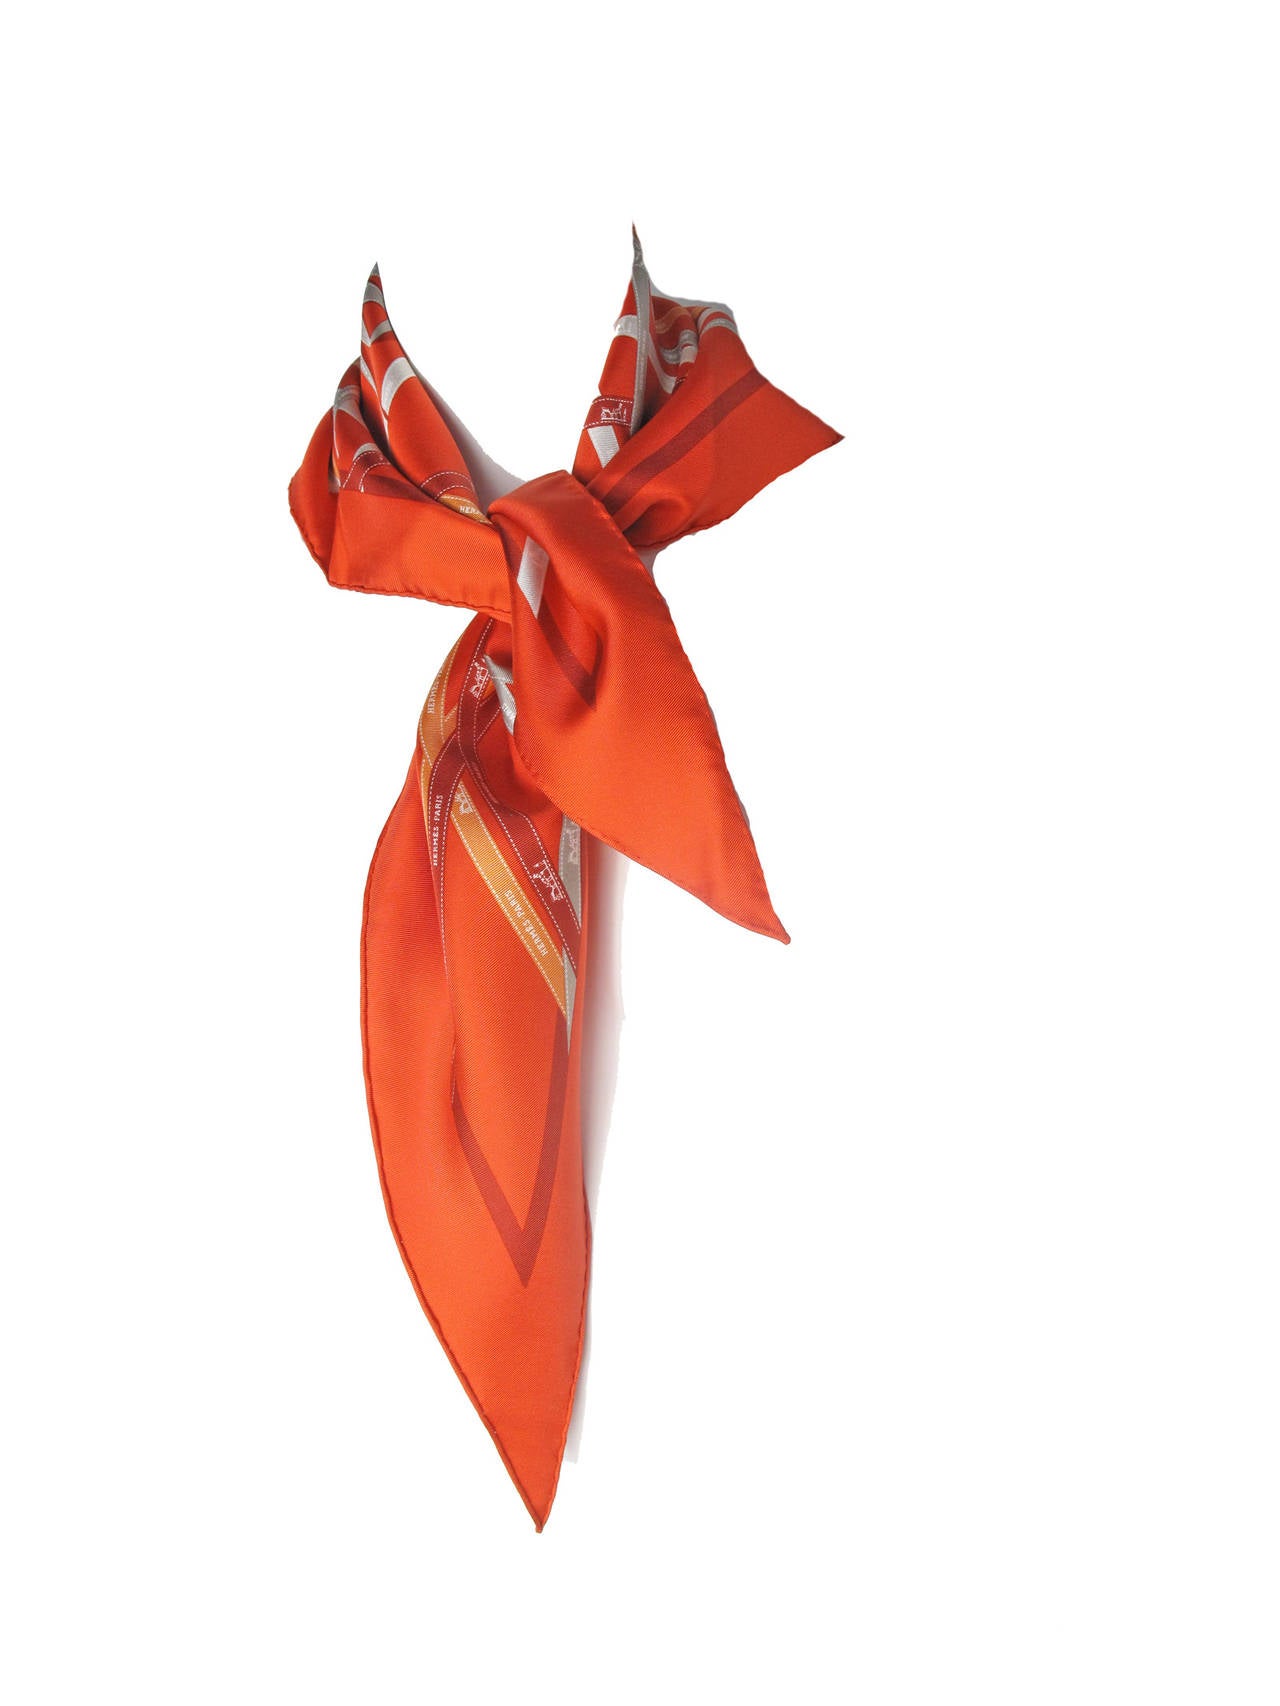 Hermes Bolduc ( hermes ribbon )  Print Red Silk Twill Triangle Scarf with Classic grey, and orange and dark red ribbon print. 

41 1/2